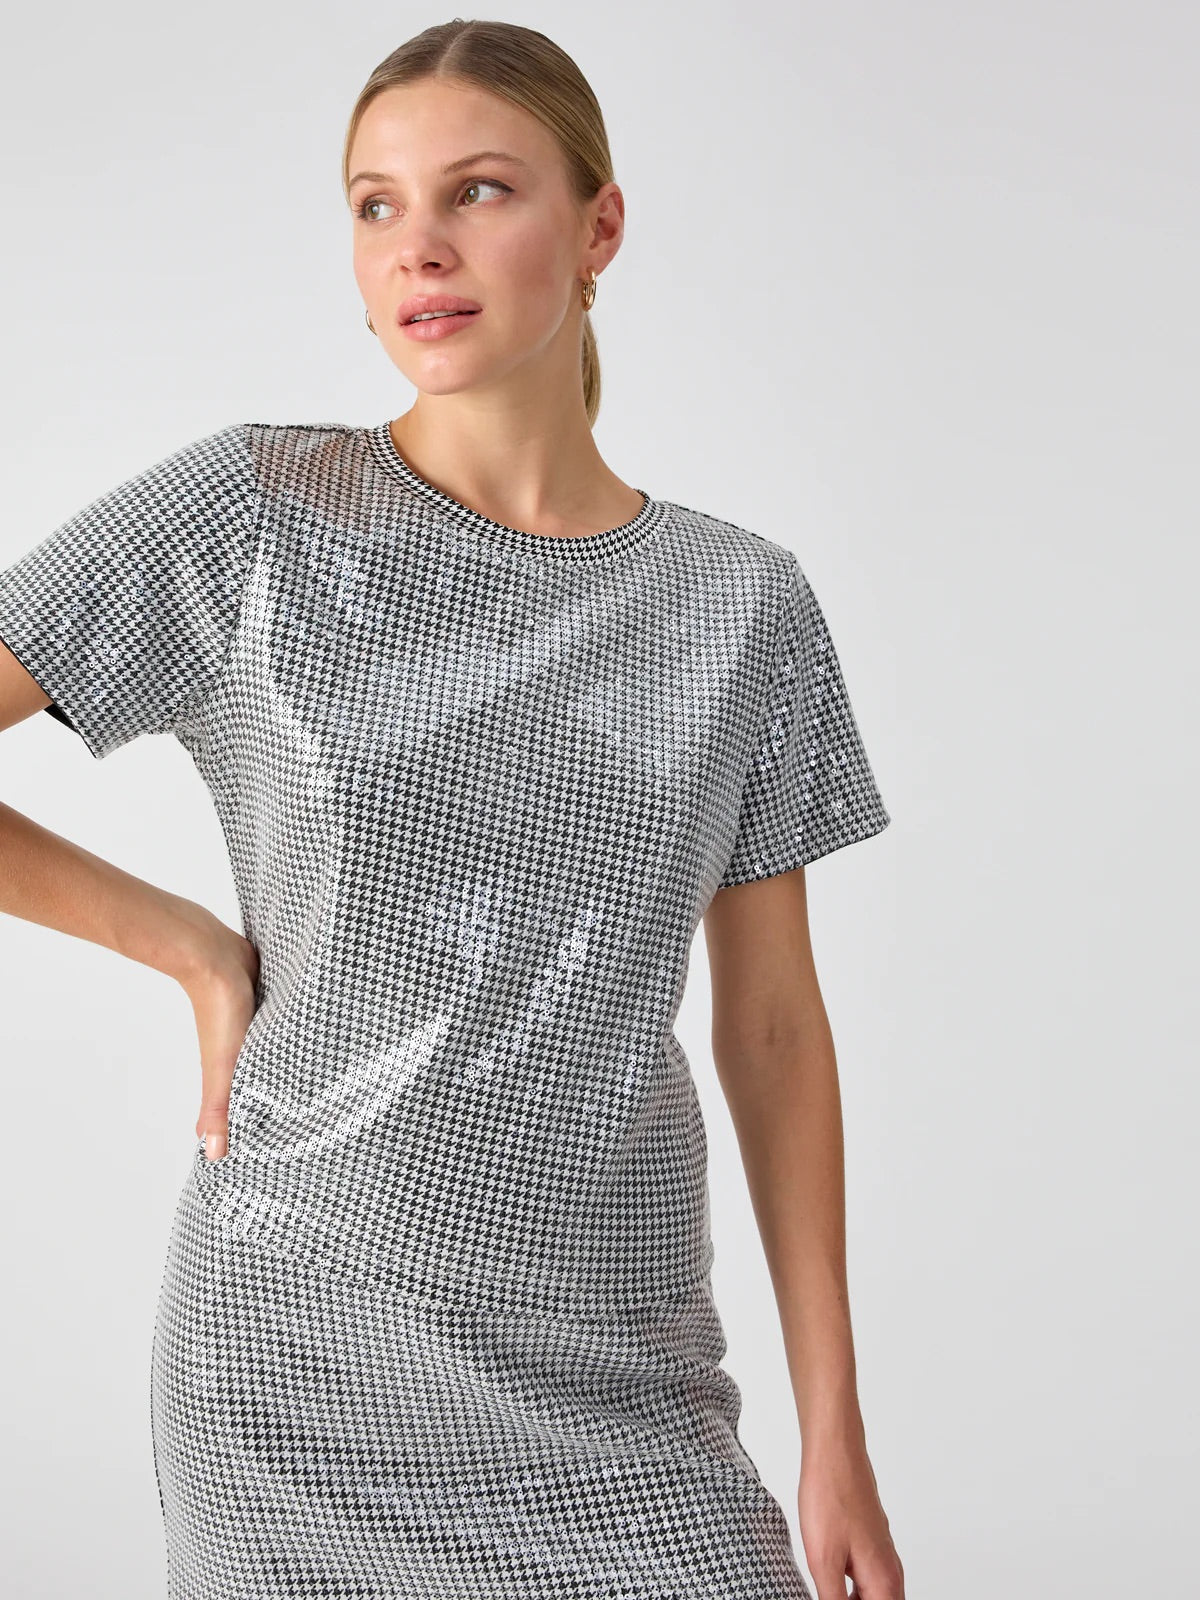 Sanctuary Perfect Sequin Tee - MICRO HOUNDSTOOTH